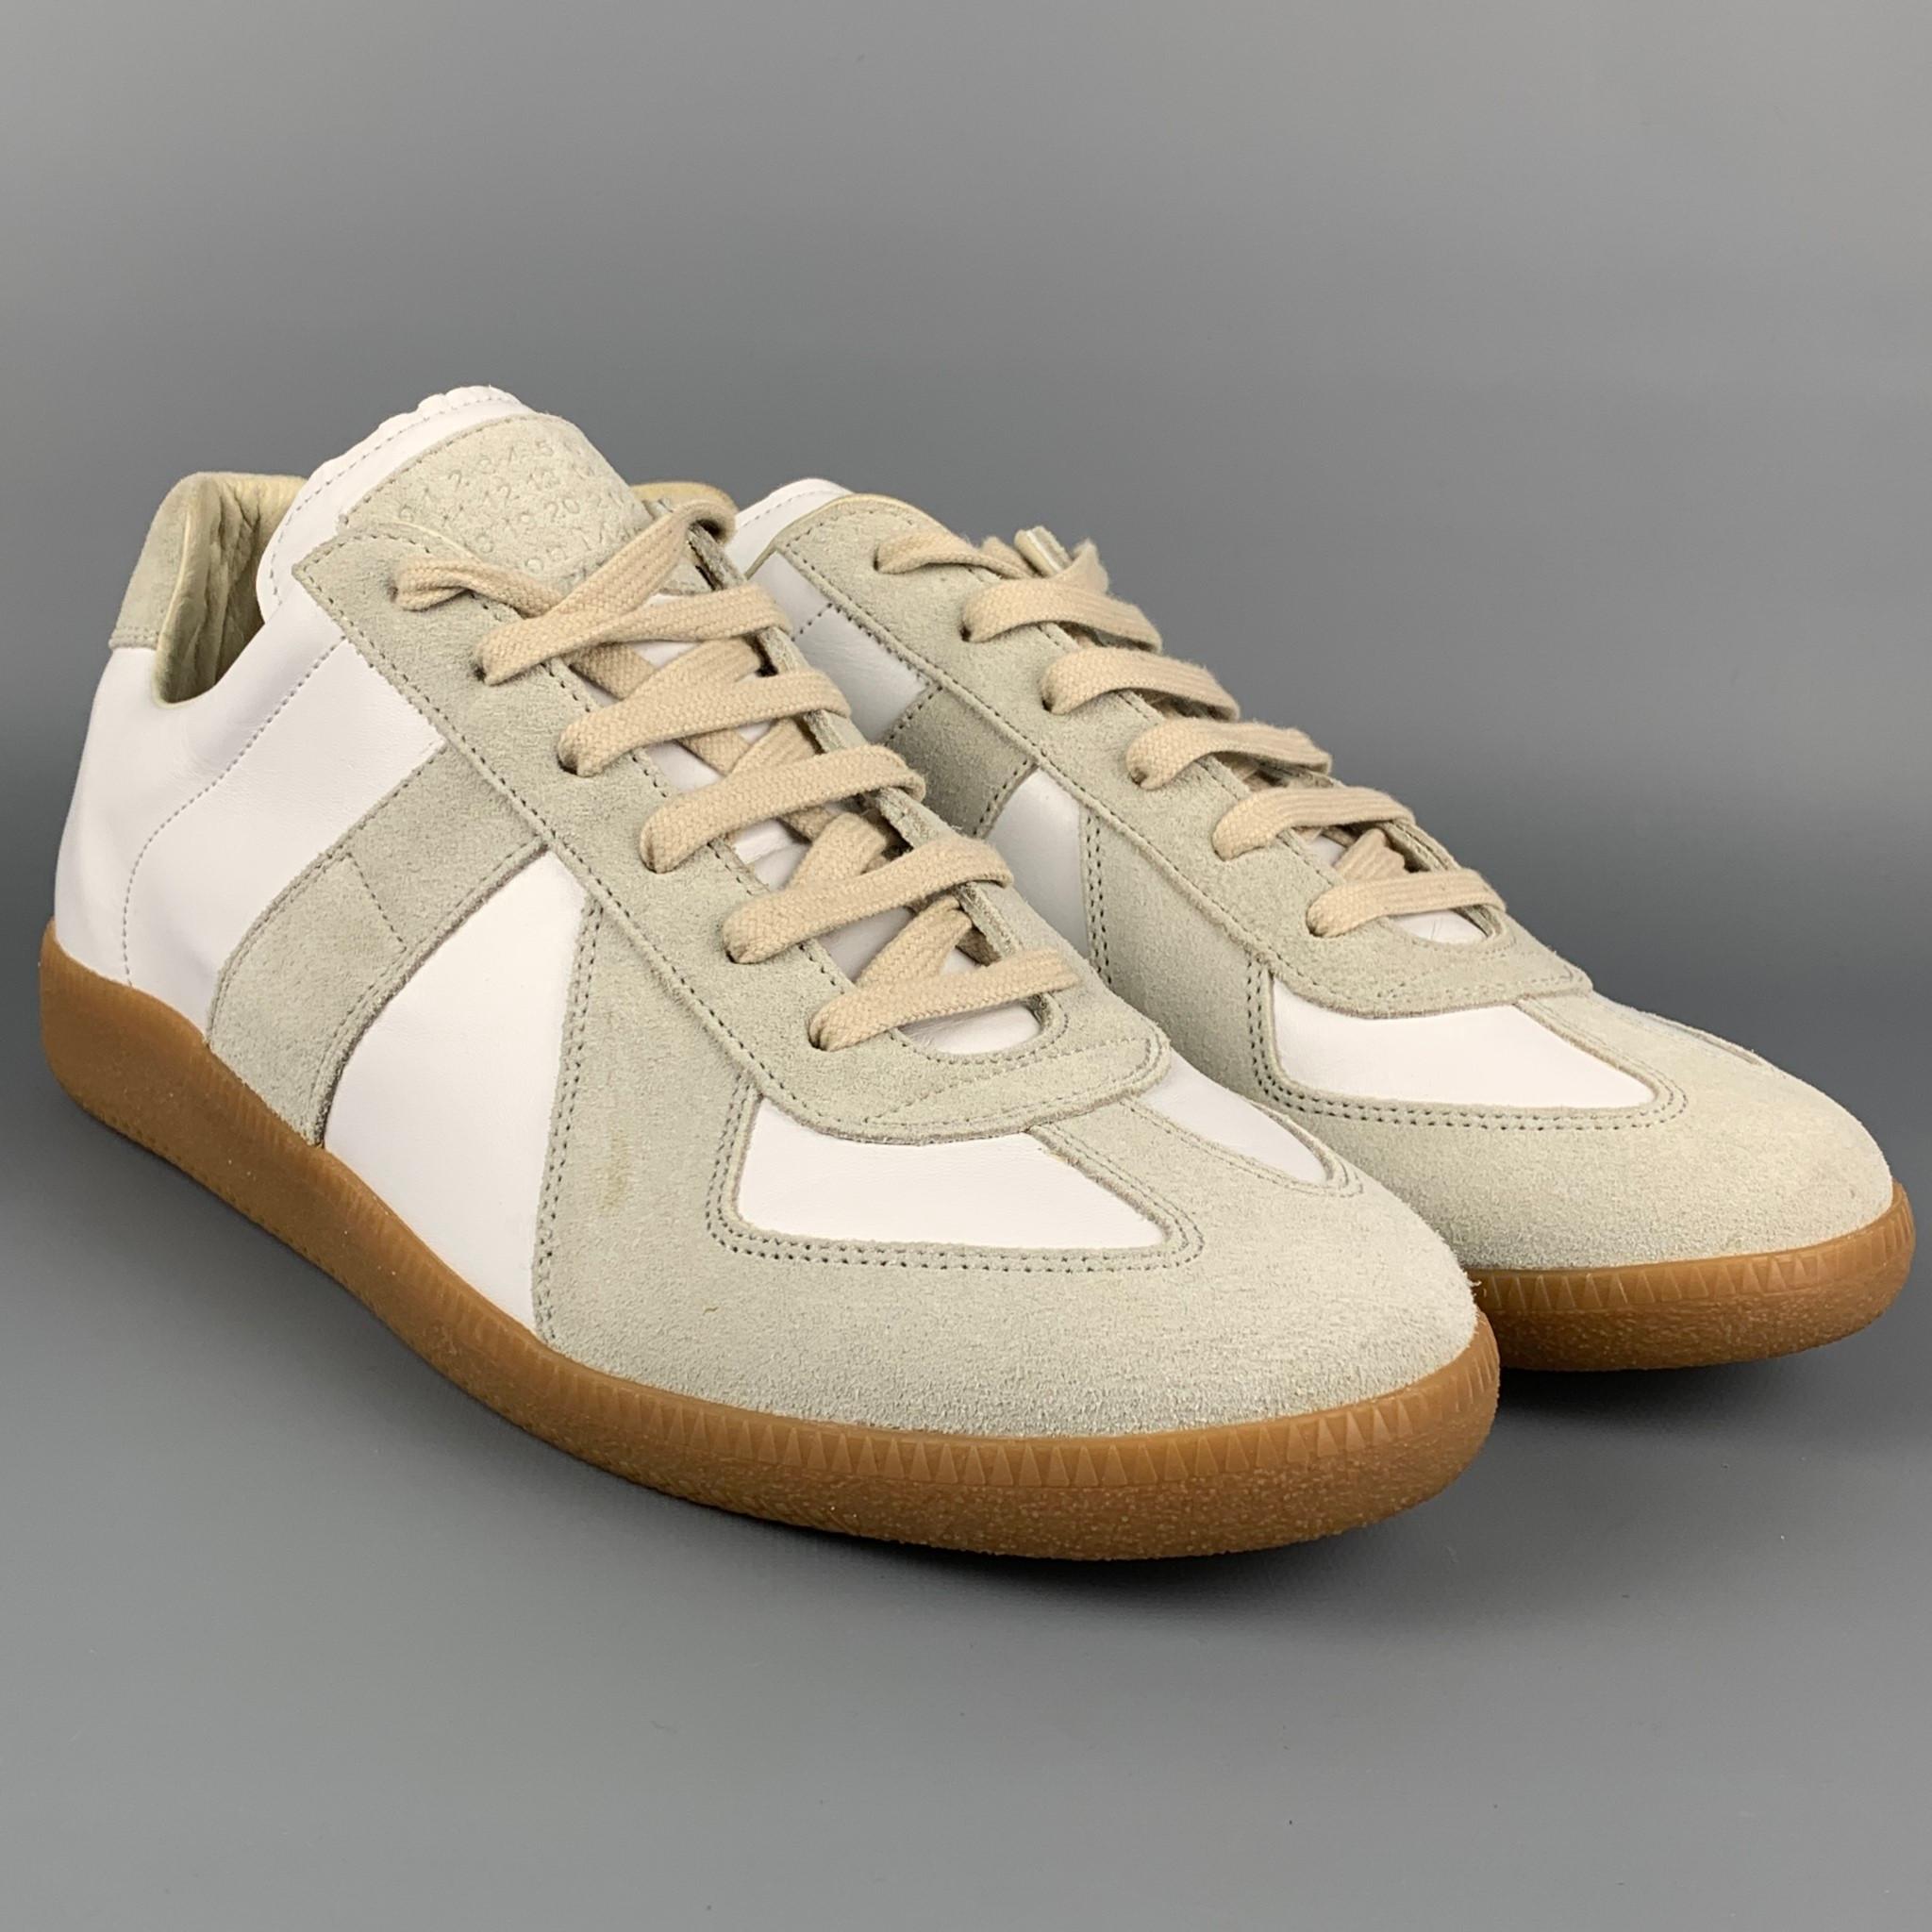 MAISON MARGIELA 'REPLICA' sneakers comes in a white color block leather featuring a suede trim, rubber sole, and a lace up closure. Made in Italy. 

Very Good Pre-Owned Condition.
Marked: 44

Outsole: 12 in. x 4 in. 